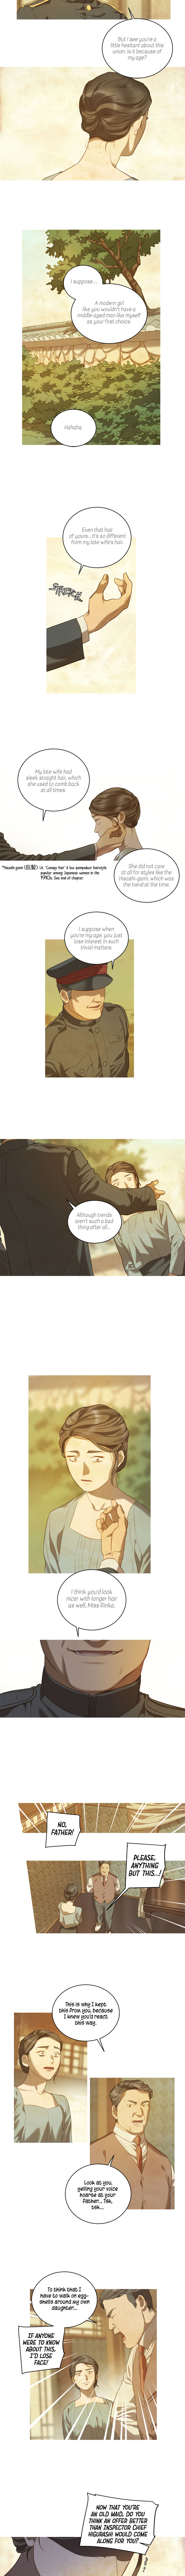 Gorae Byul - The Gyeongseong Mermaid - Chapter 12 Page 5